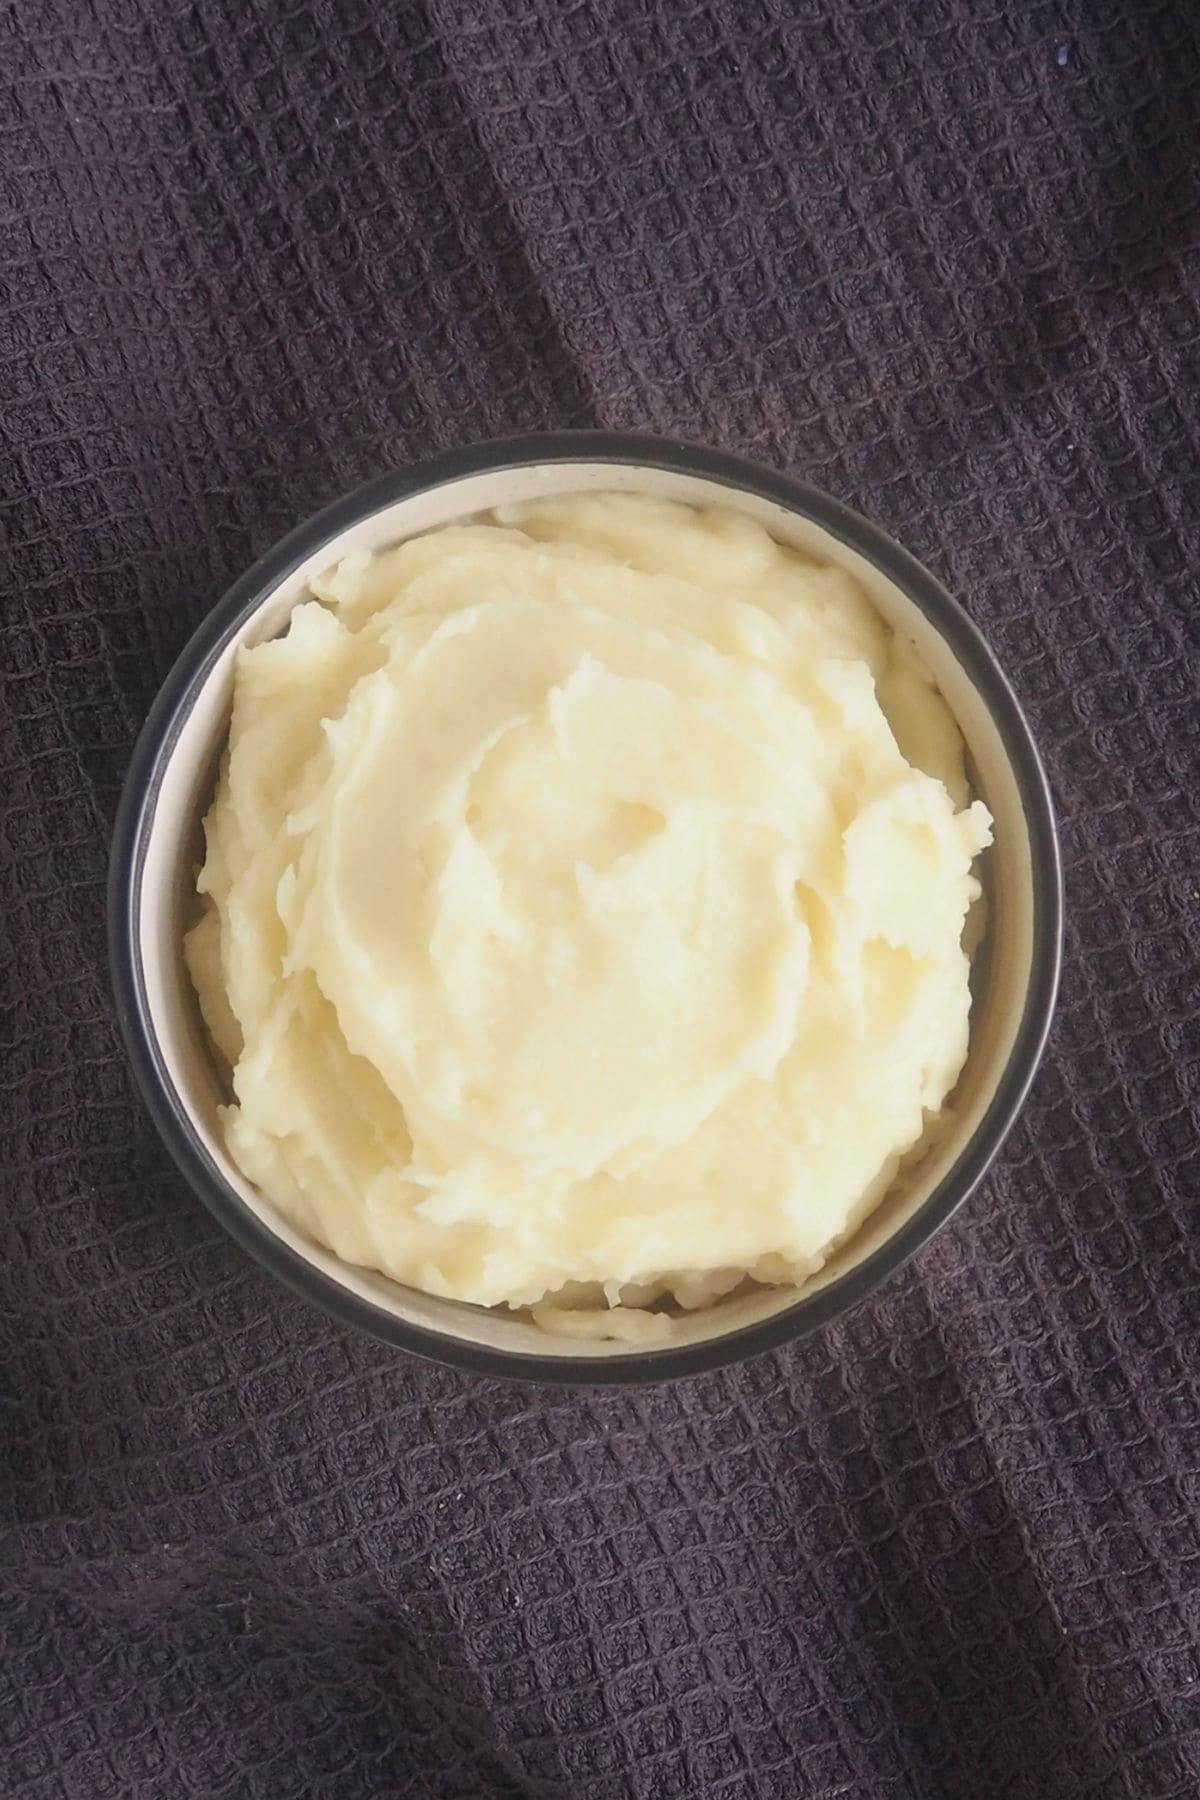 Overhead view of a bowl of mashed potatoes. The bowl is sitting on a dark grey towel.